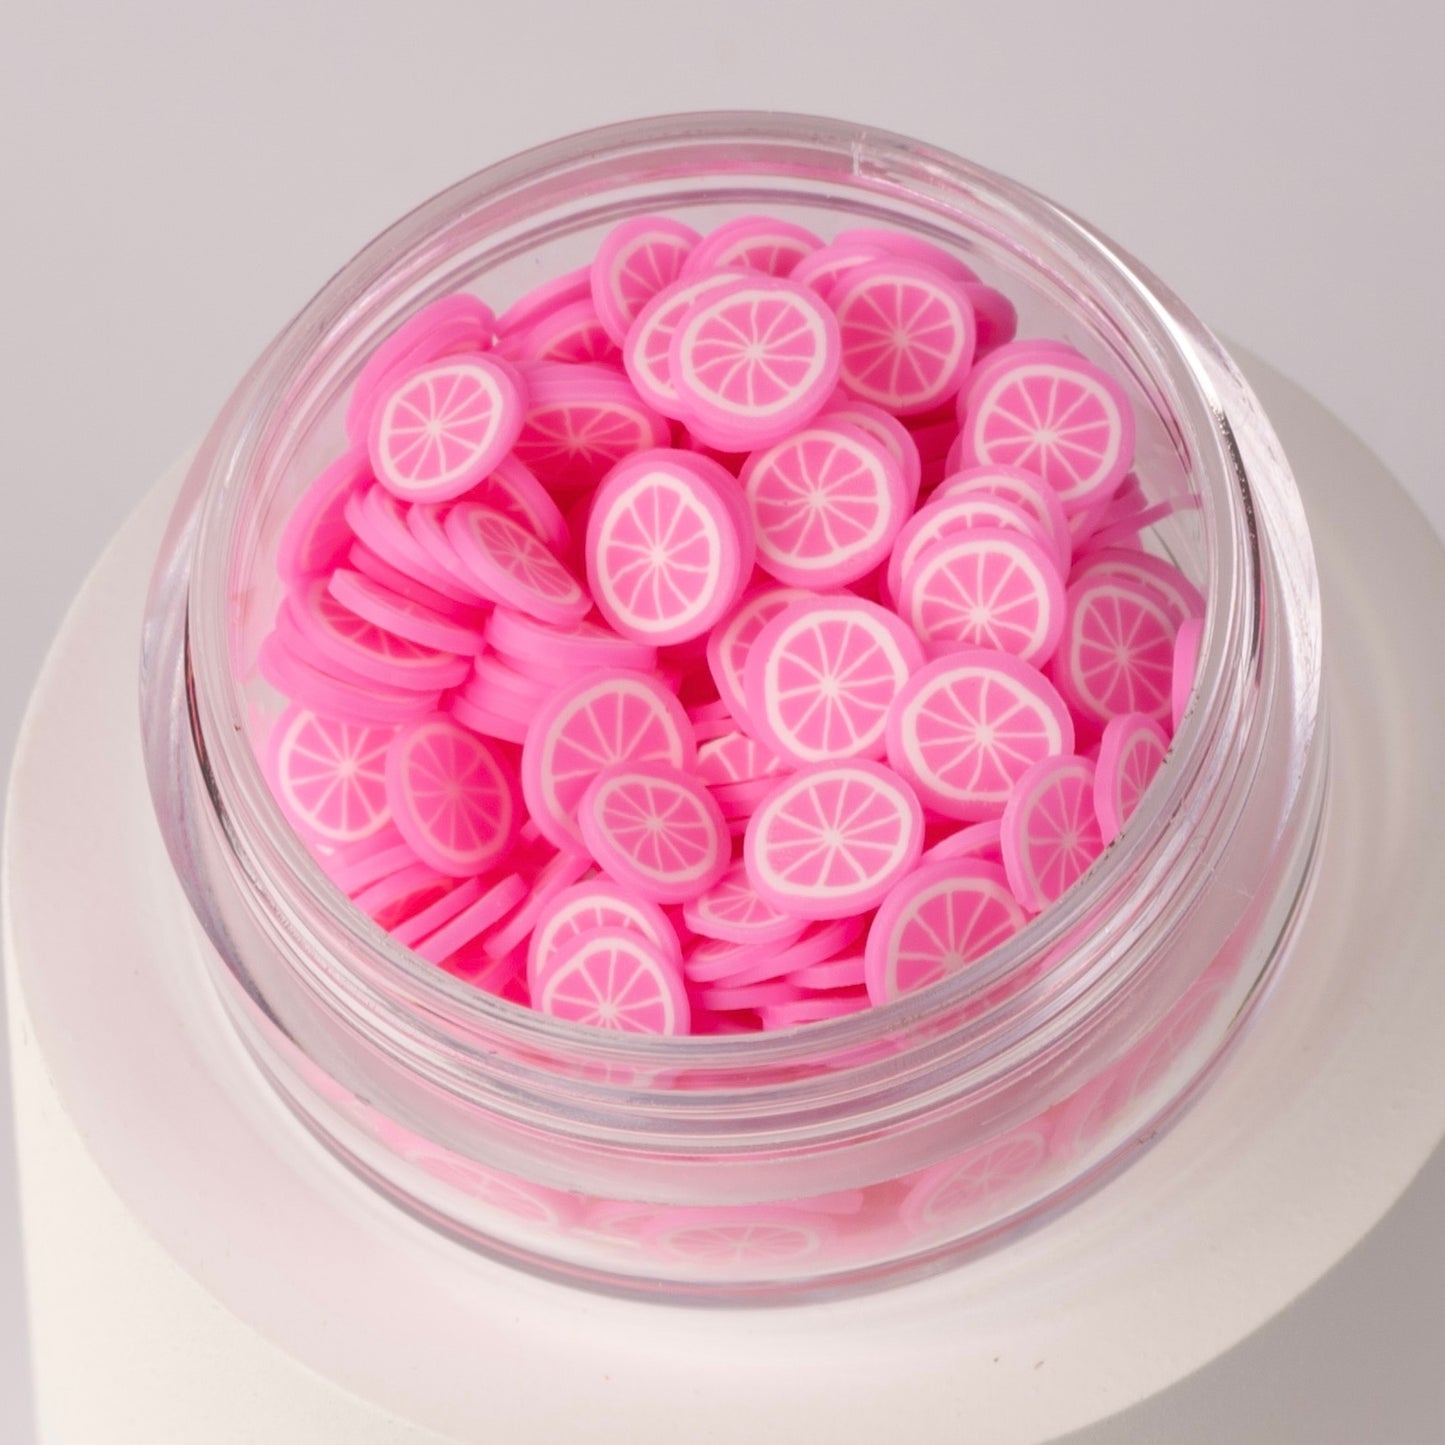 Mini pink lemon slices in clear jar on white background.